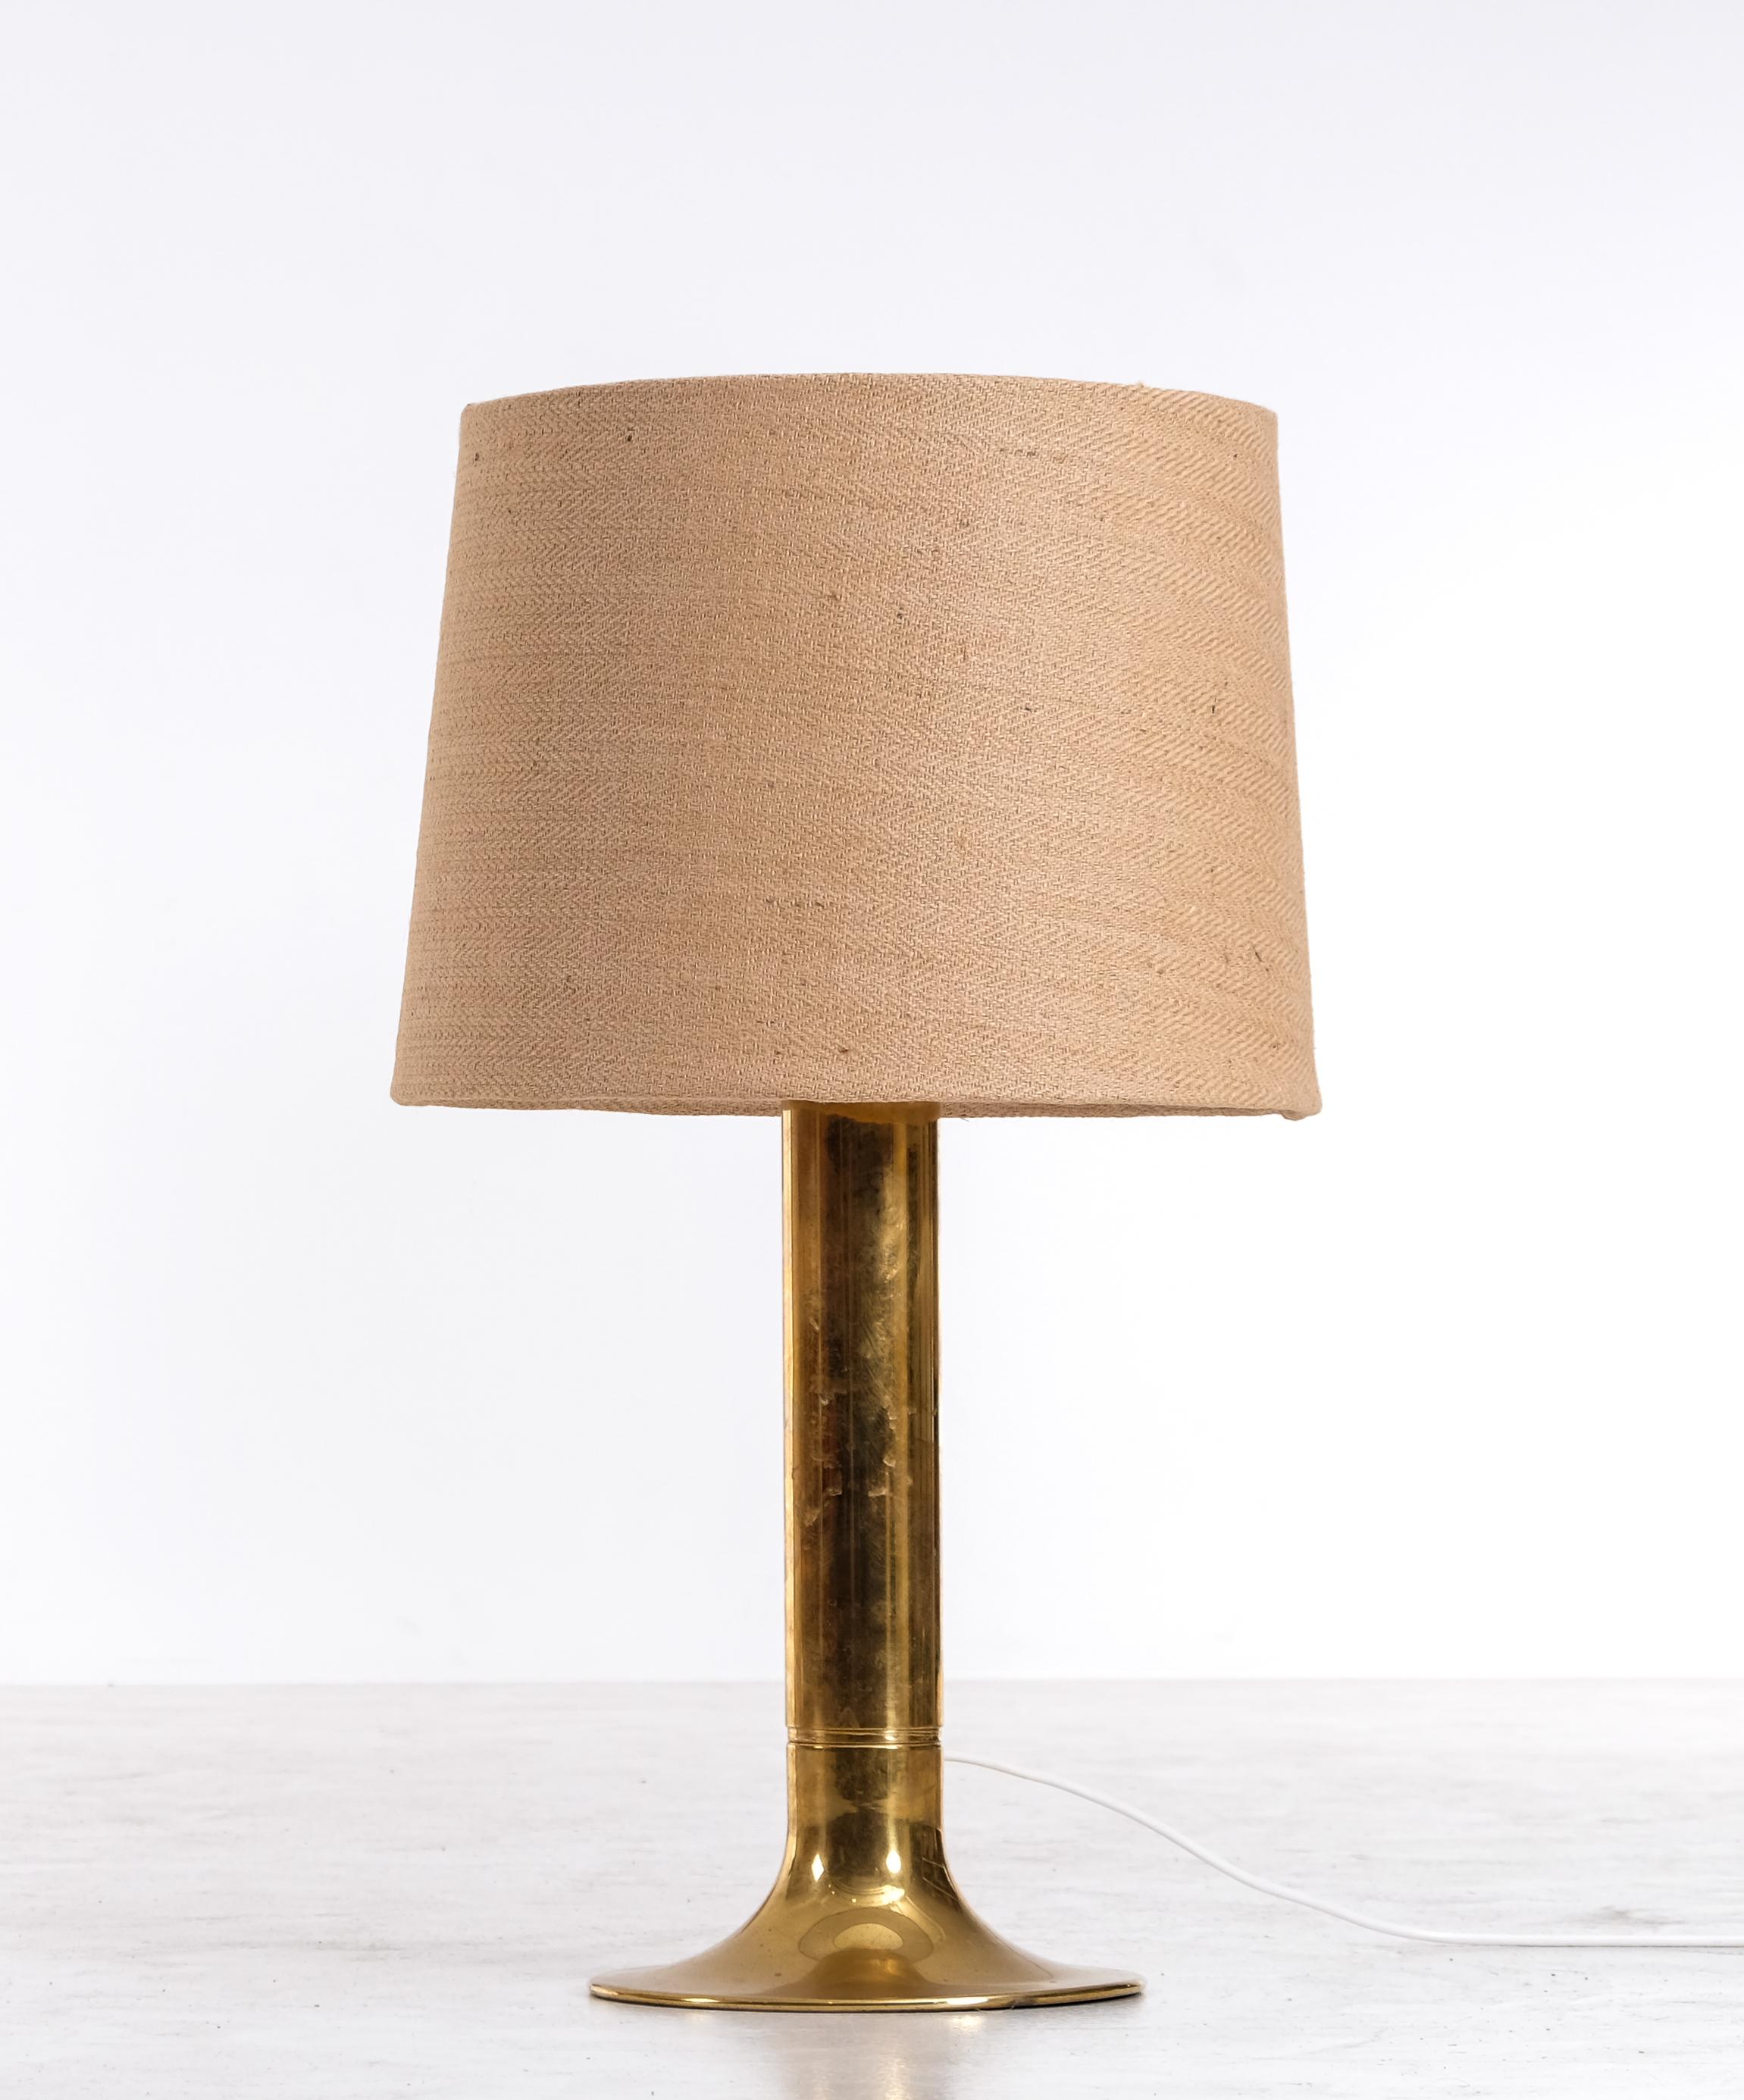 Pair of Hans-Agne Jakobsson Brass Table Lamps model B204, 1970s In Good Condition For Sale In Stockholm, SE